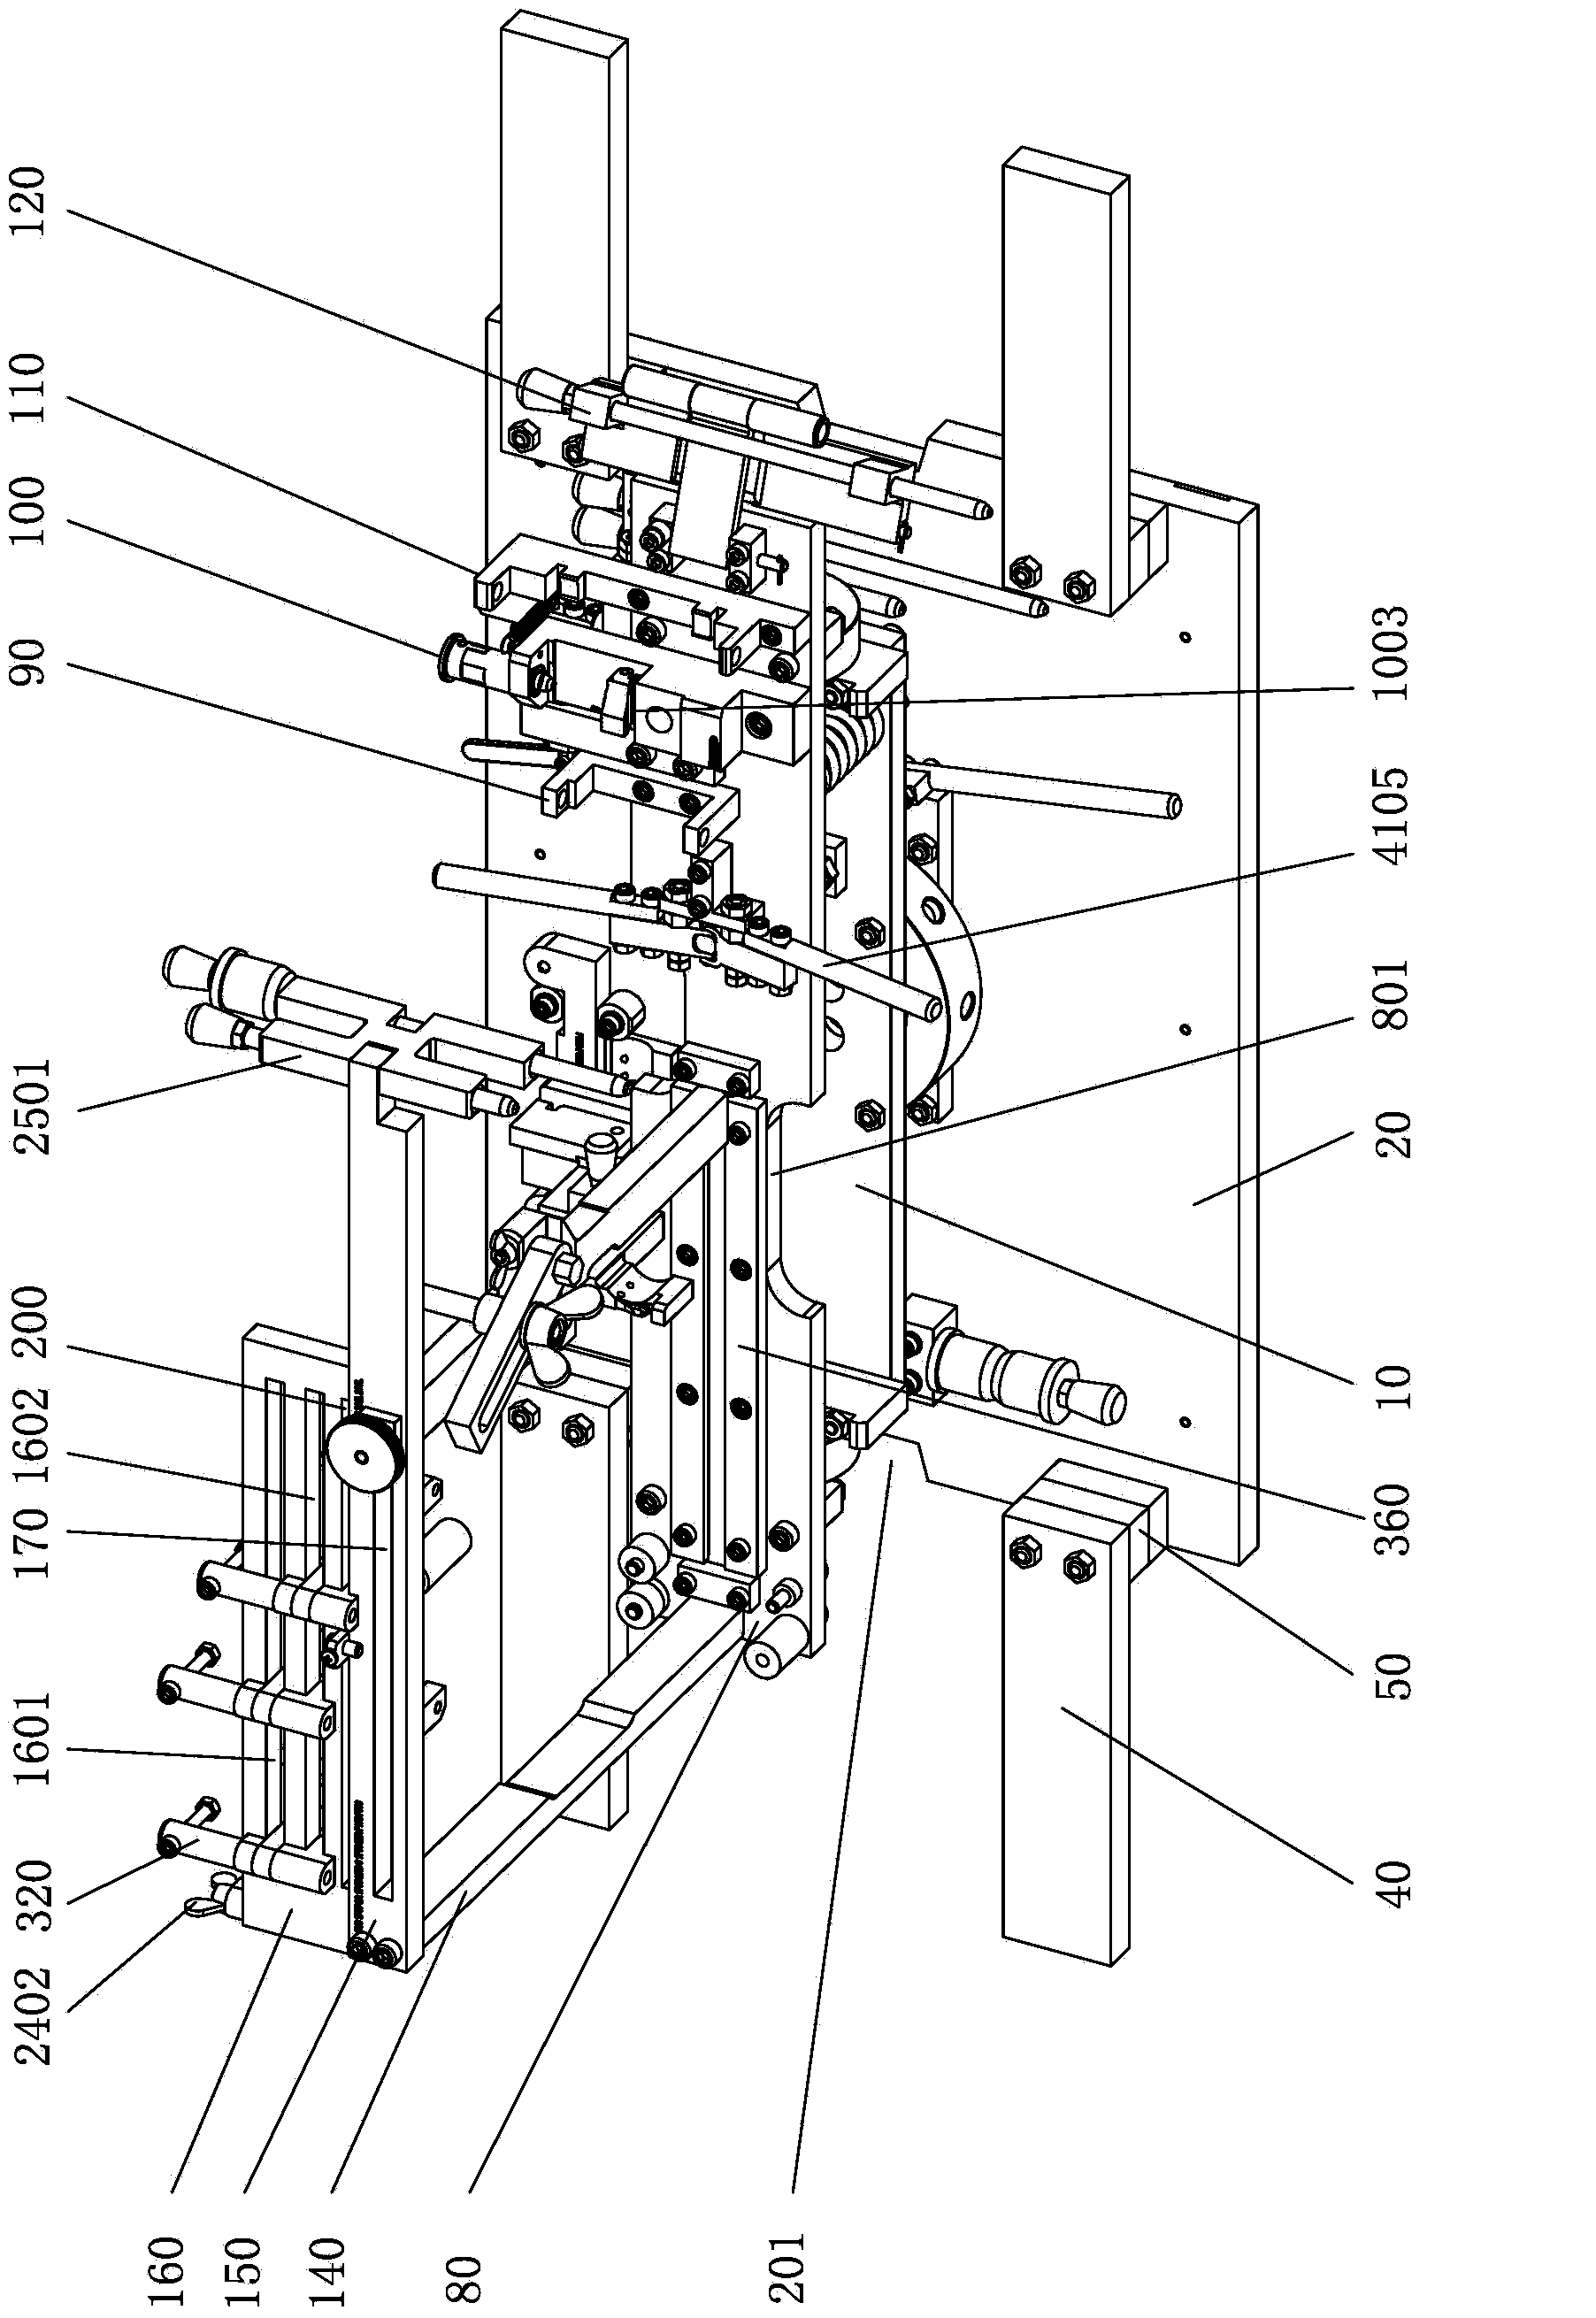 Multifunctional engine assembling table